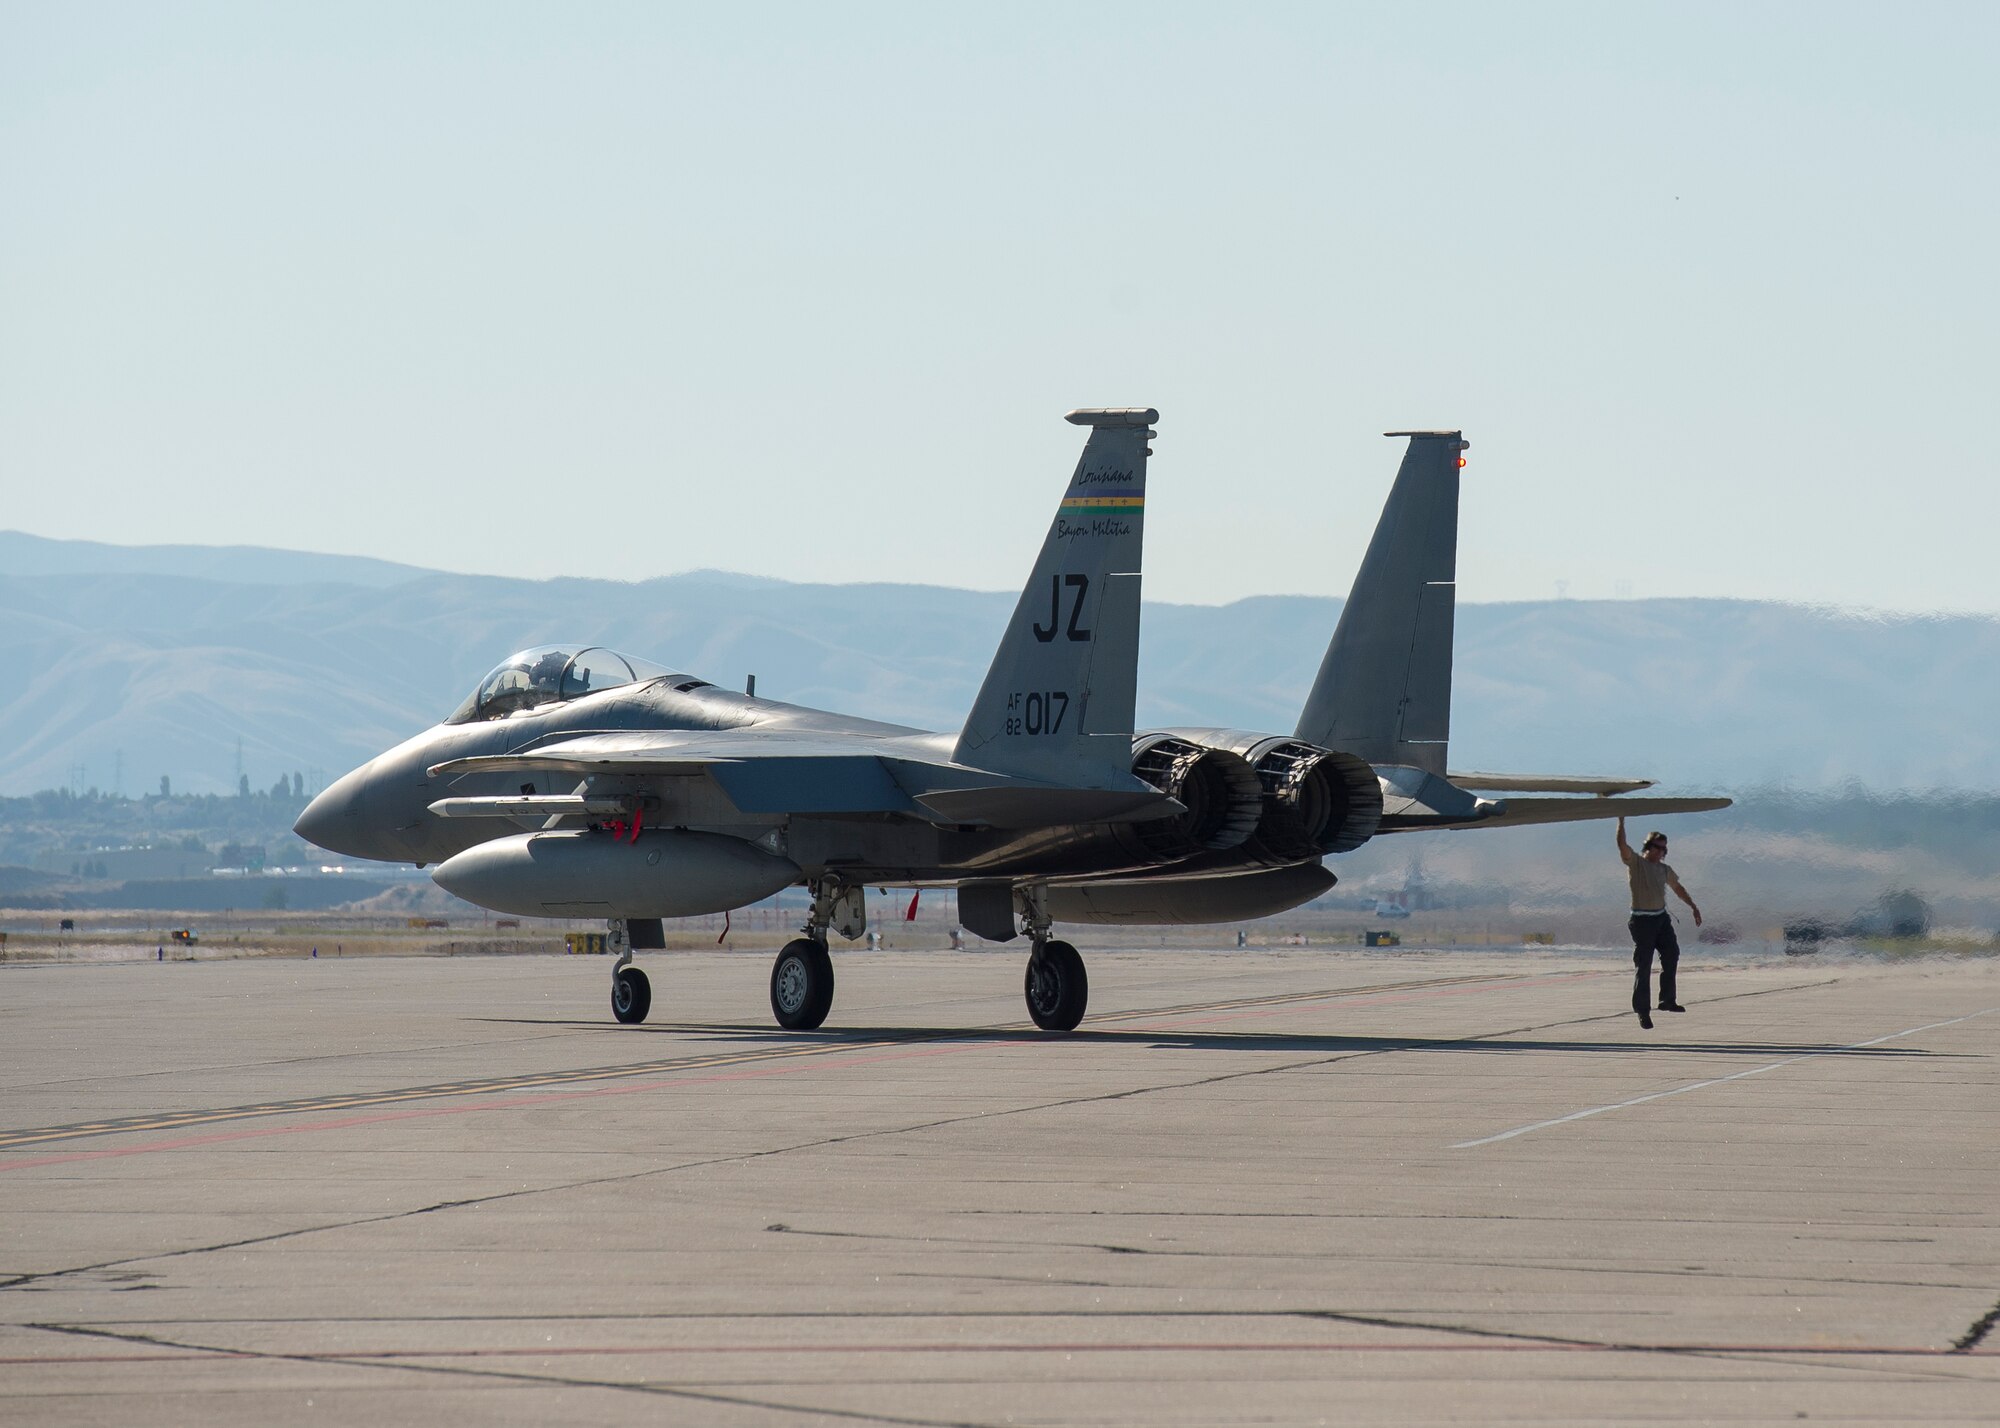 An F-15C assigned to the 122nd Fighter Squadron, 159th Fighter Wing, Naval Air Station Joint Reserve Base New Orleans, La., taxies at Gowen Field, Boise, Idaho, July 19, 2018. The 122nd FS is training with the 124th Fighter Wing's 190th Fighter Squadron A-10 Thunderbolt II. (U.S. Air National Guard photo by Master Sgt. Joshua C. Allmaras)